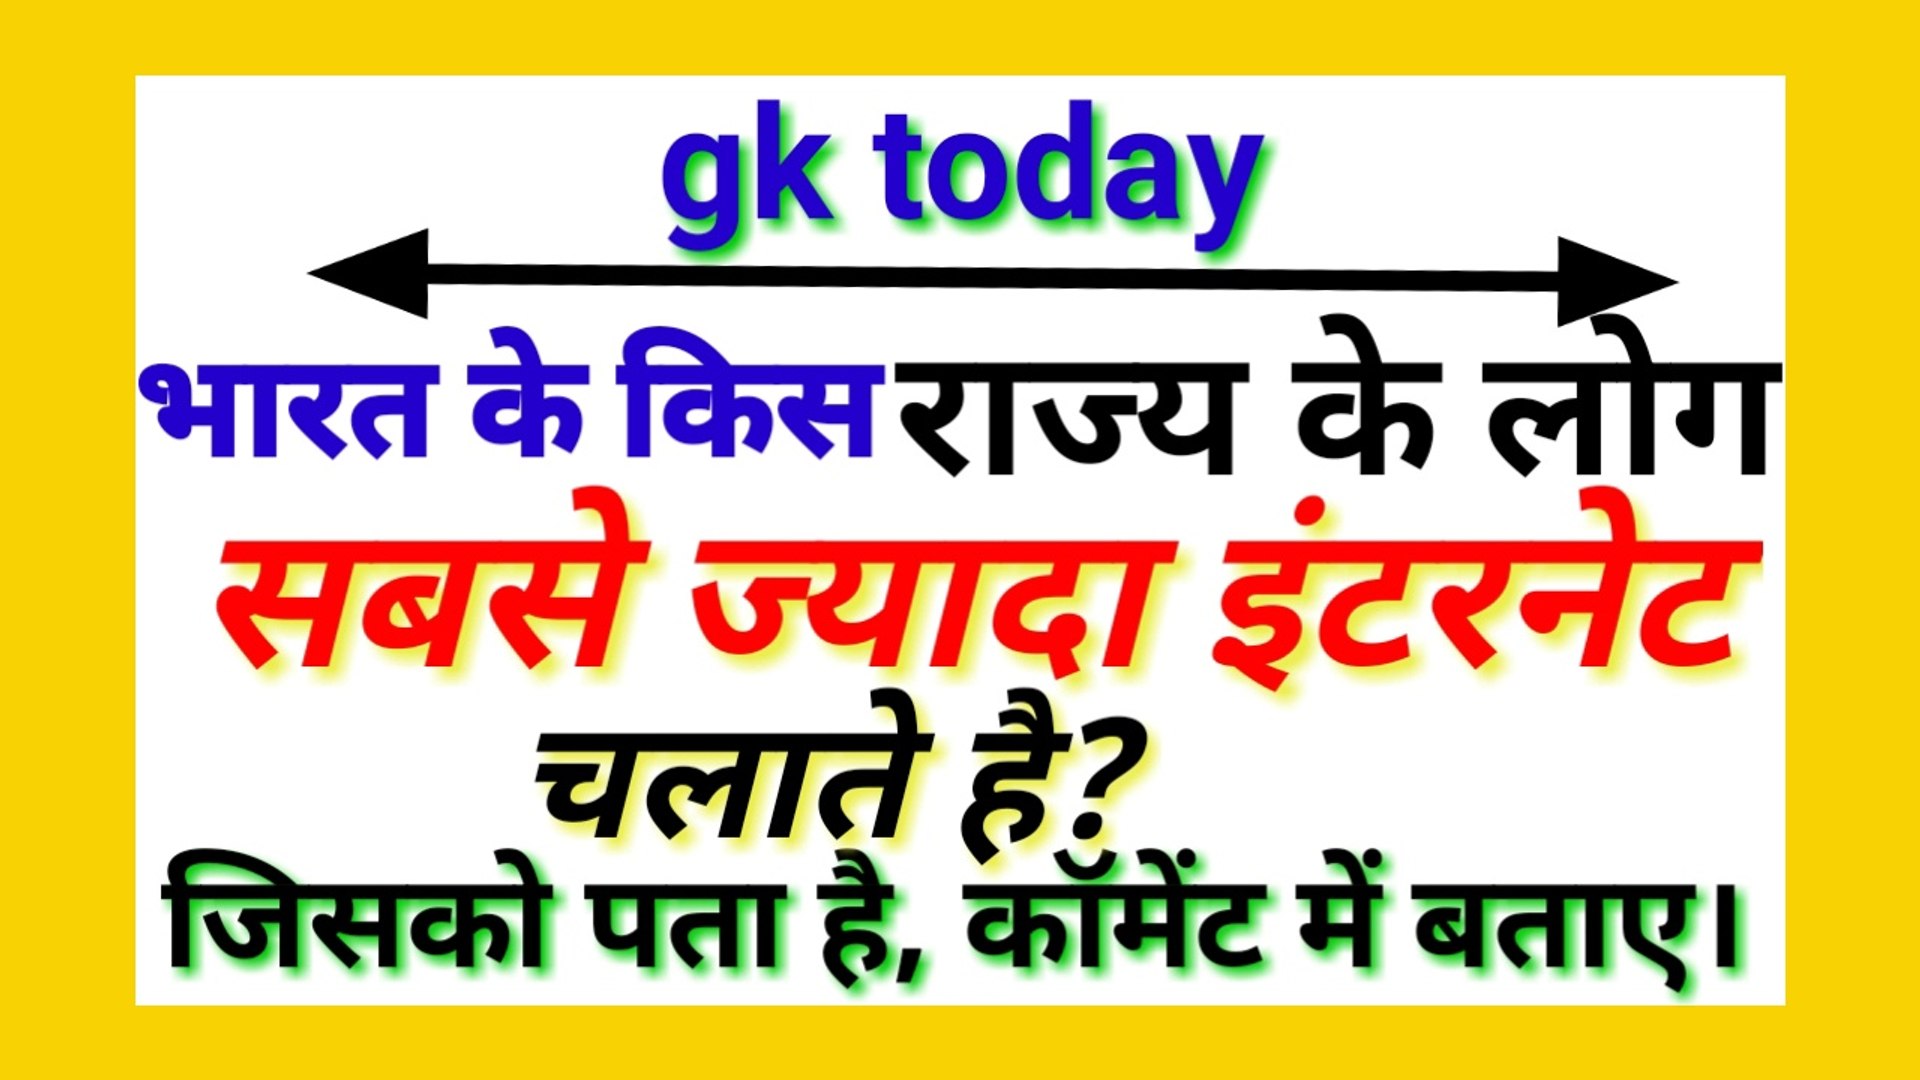 Instructing Gk Gk Questions And Answers In Hindi Gktoday Gk 2019